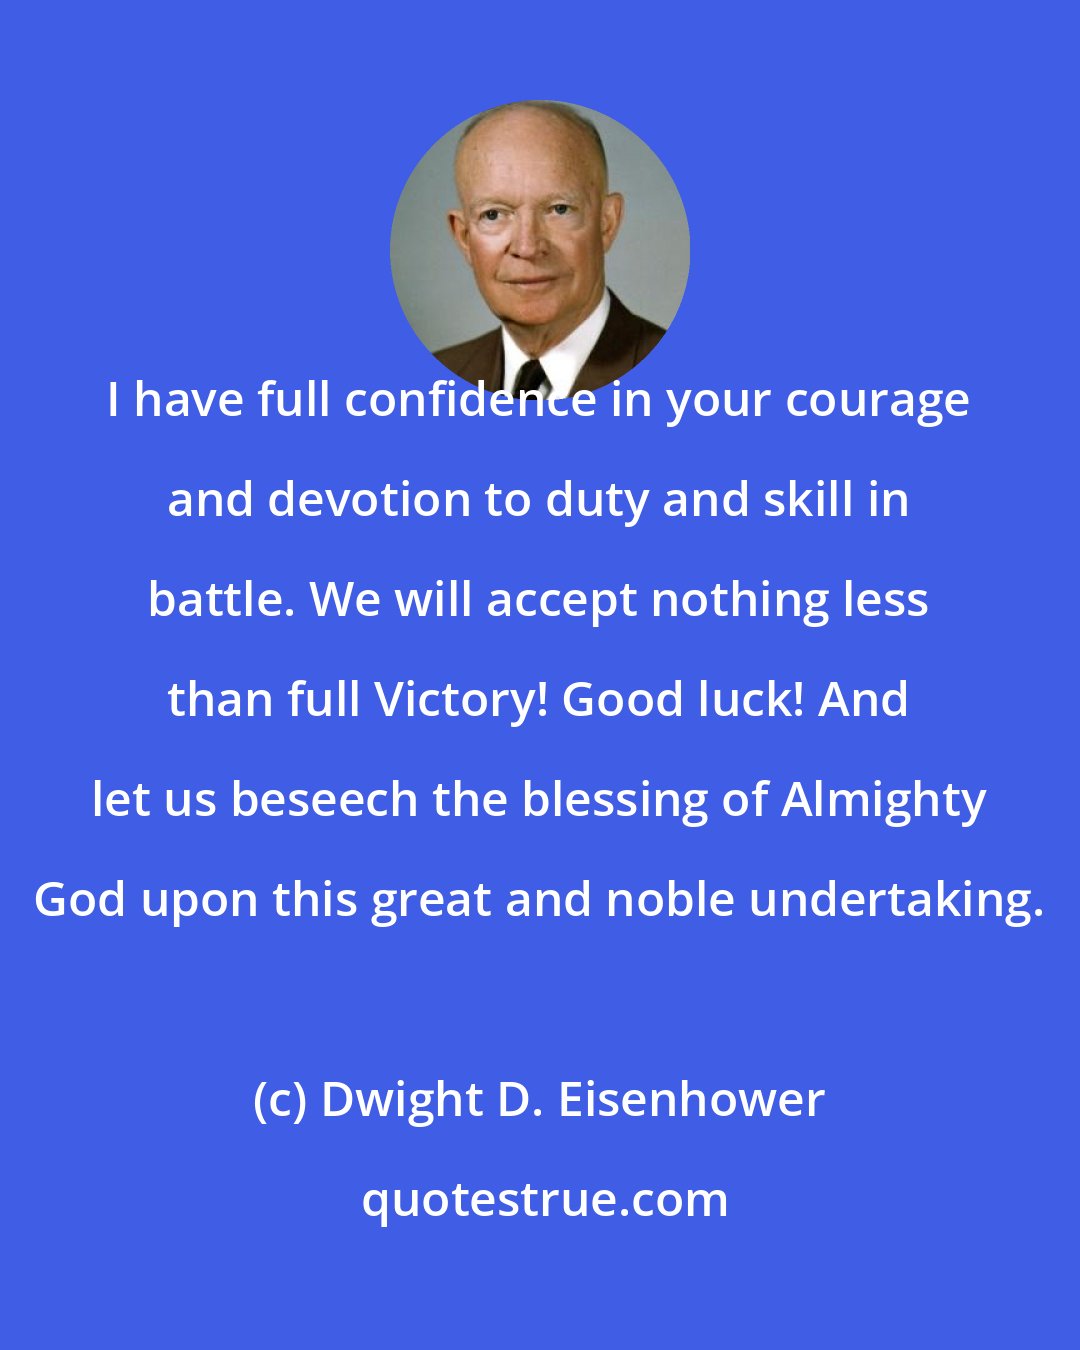 Dwight D. Eisenhower: I have full confidence in your courage and devotion to duty and skill in battle. We will accept nothing less than full Victory! Good luck! And let us beseech the blessing of Almighty God upon this great and noble undertaking.